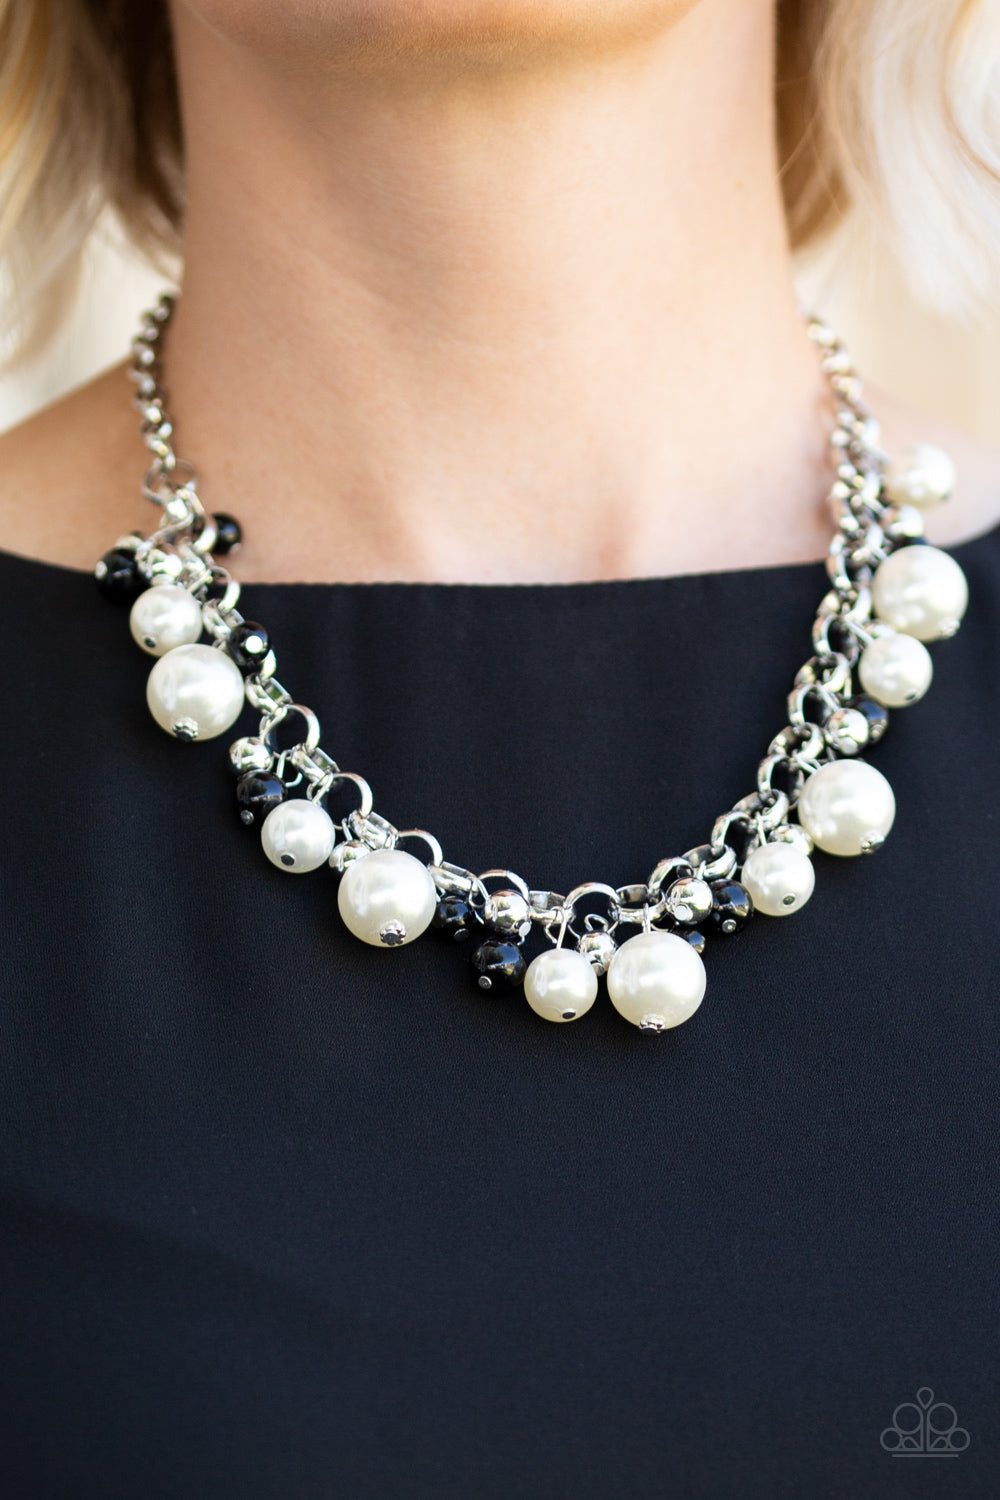 Paparazzi Accessories - The Upstater - Black Necklace